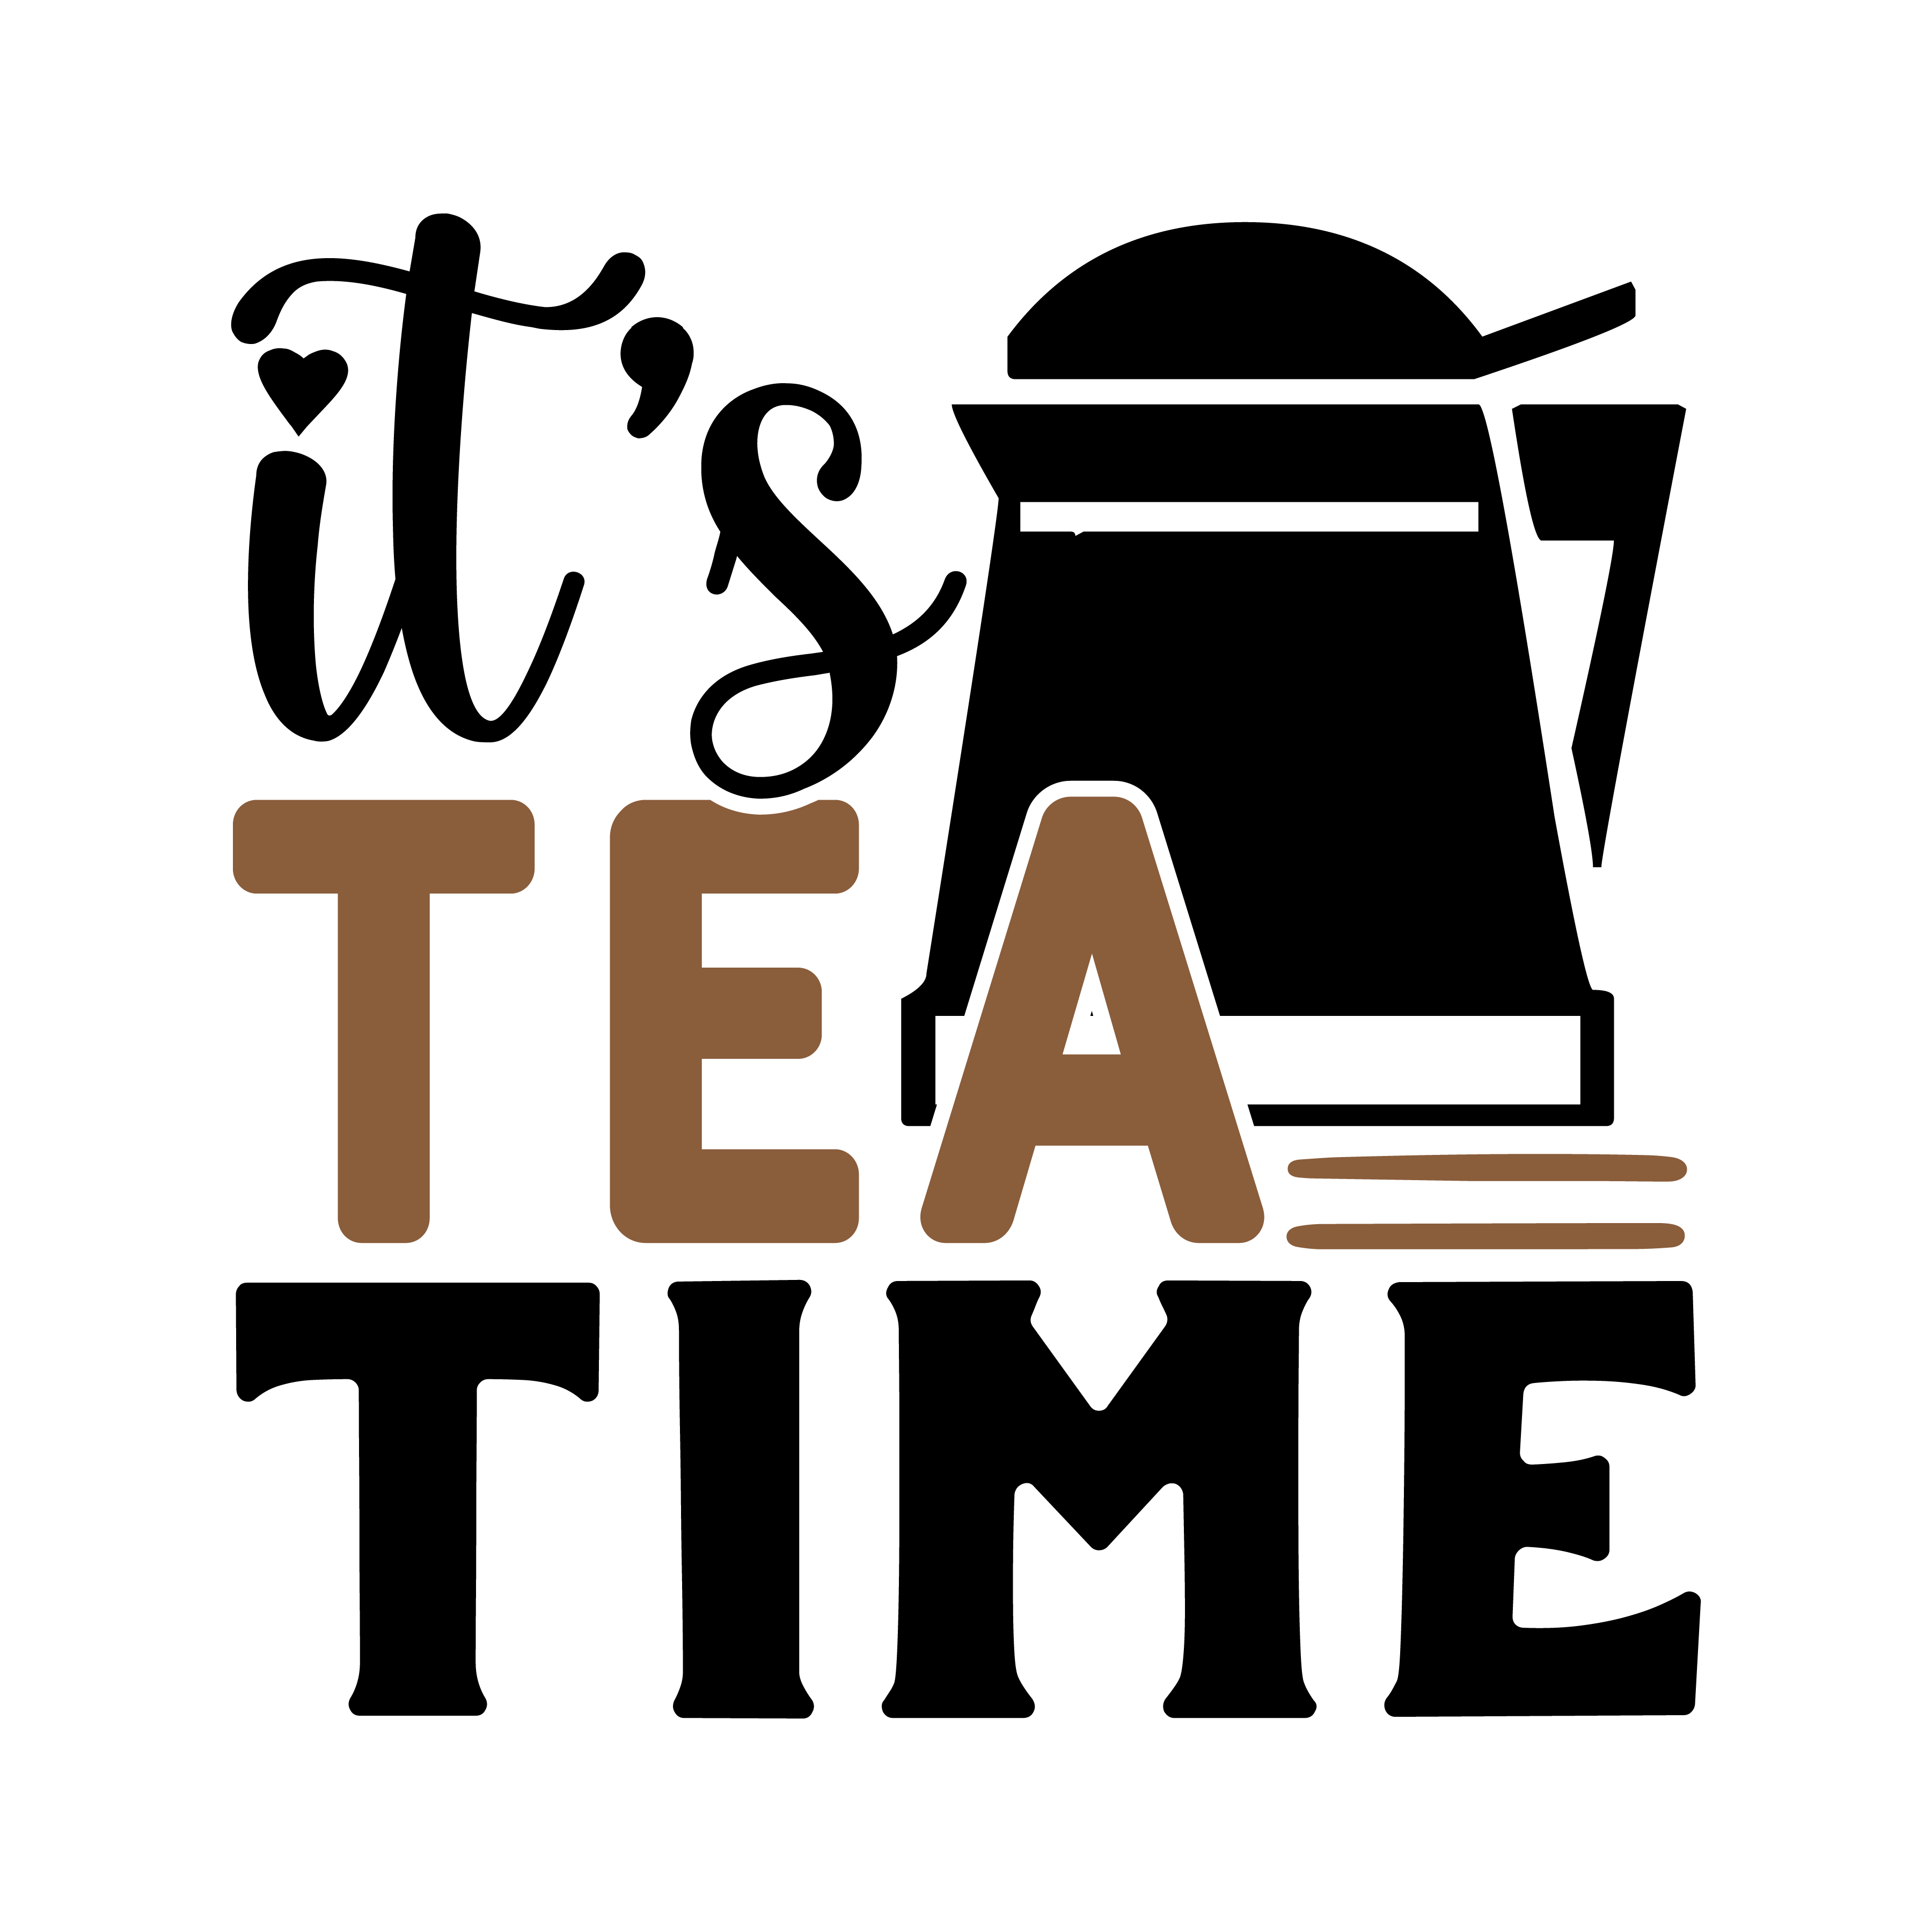 its tea time, tea sayings, tea quotes, Cricut designs, free, clip art, svg file, template, pattern, stencil, silhouette, cut file, design space, short, funny, shirt, cup, DIY crafts and projects, embroidery